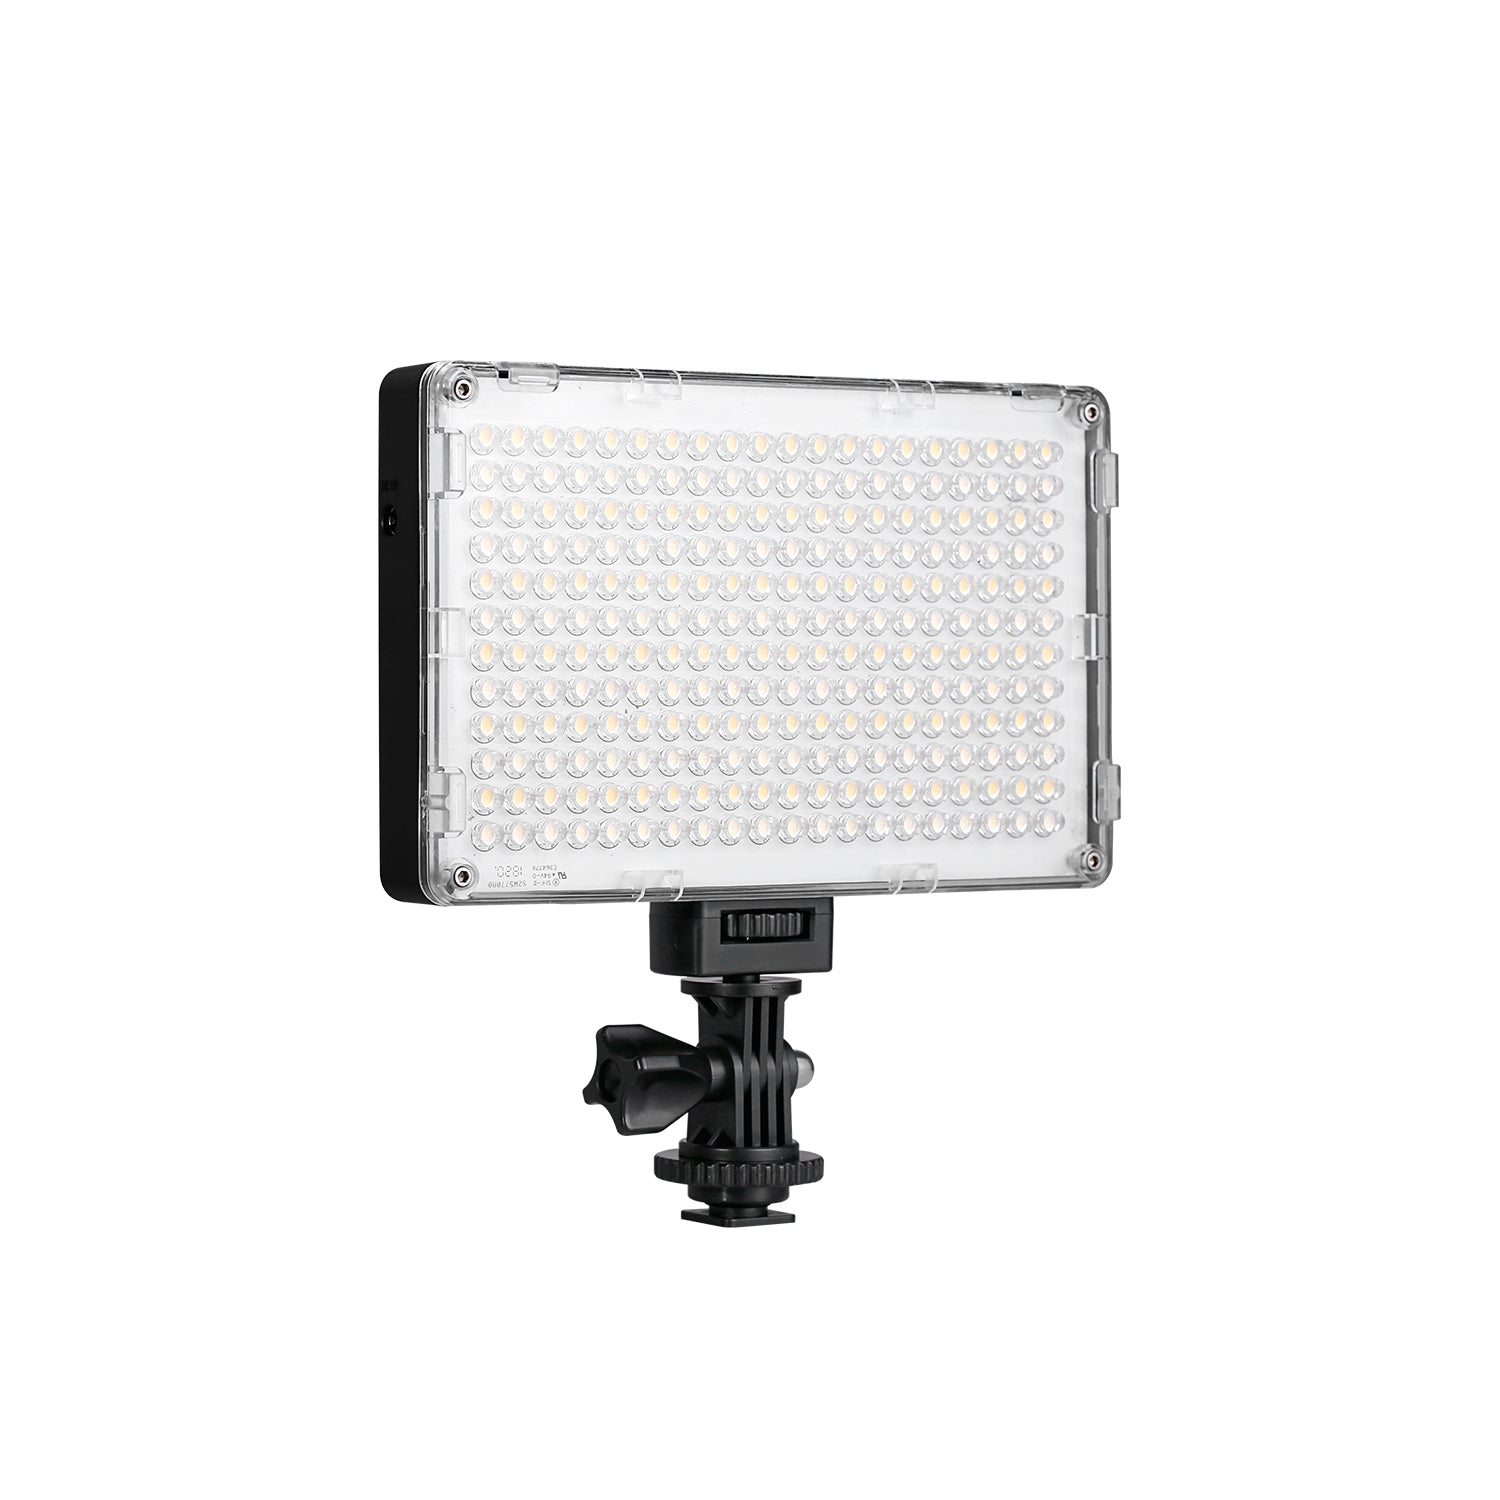 GVM-10S Bi Color Professional Video on Camera Video Light with Control Knob - GVMLED